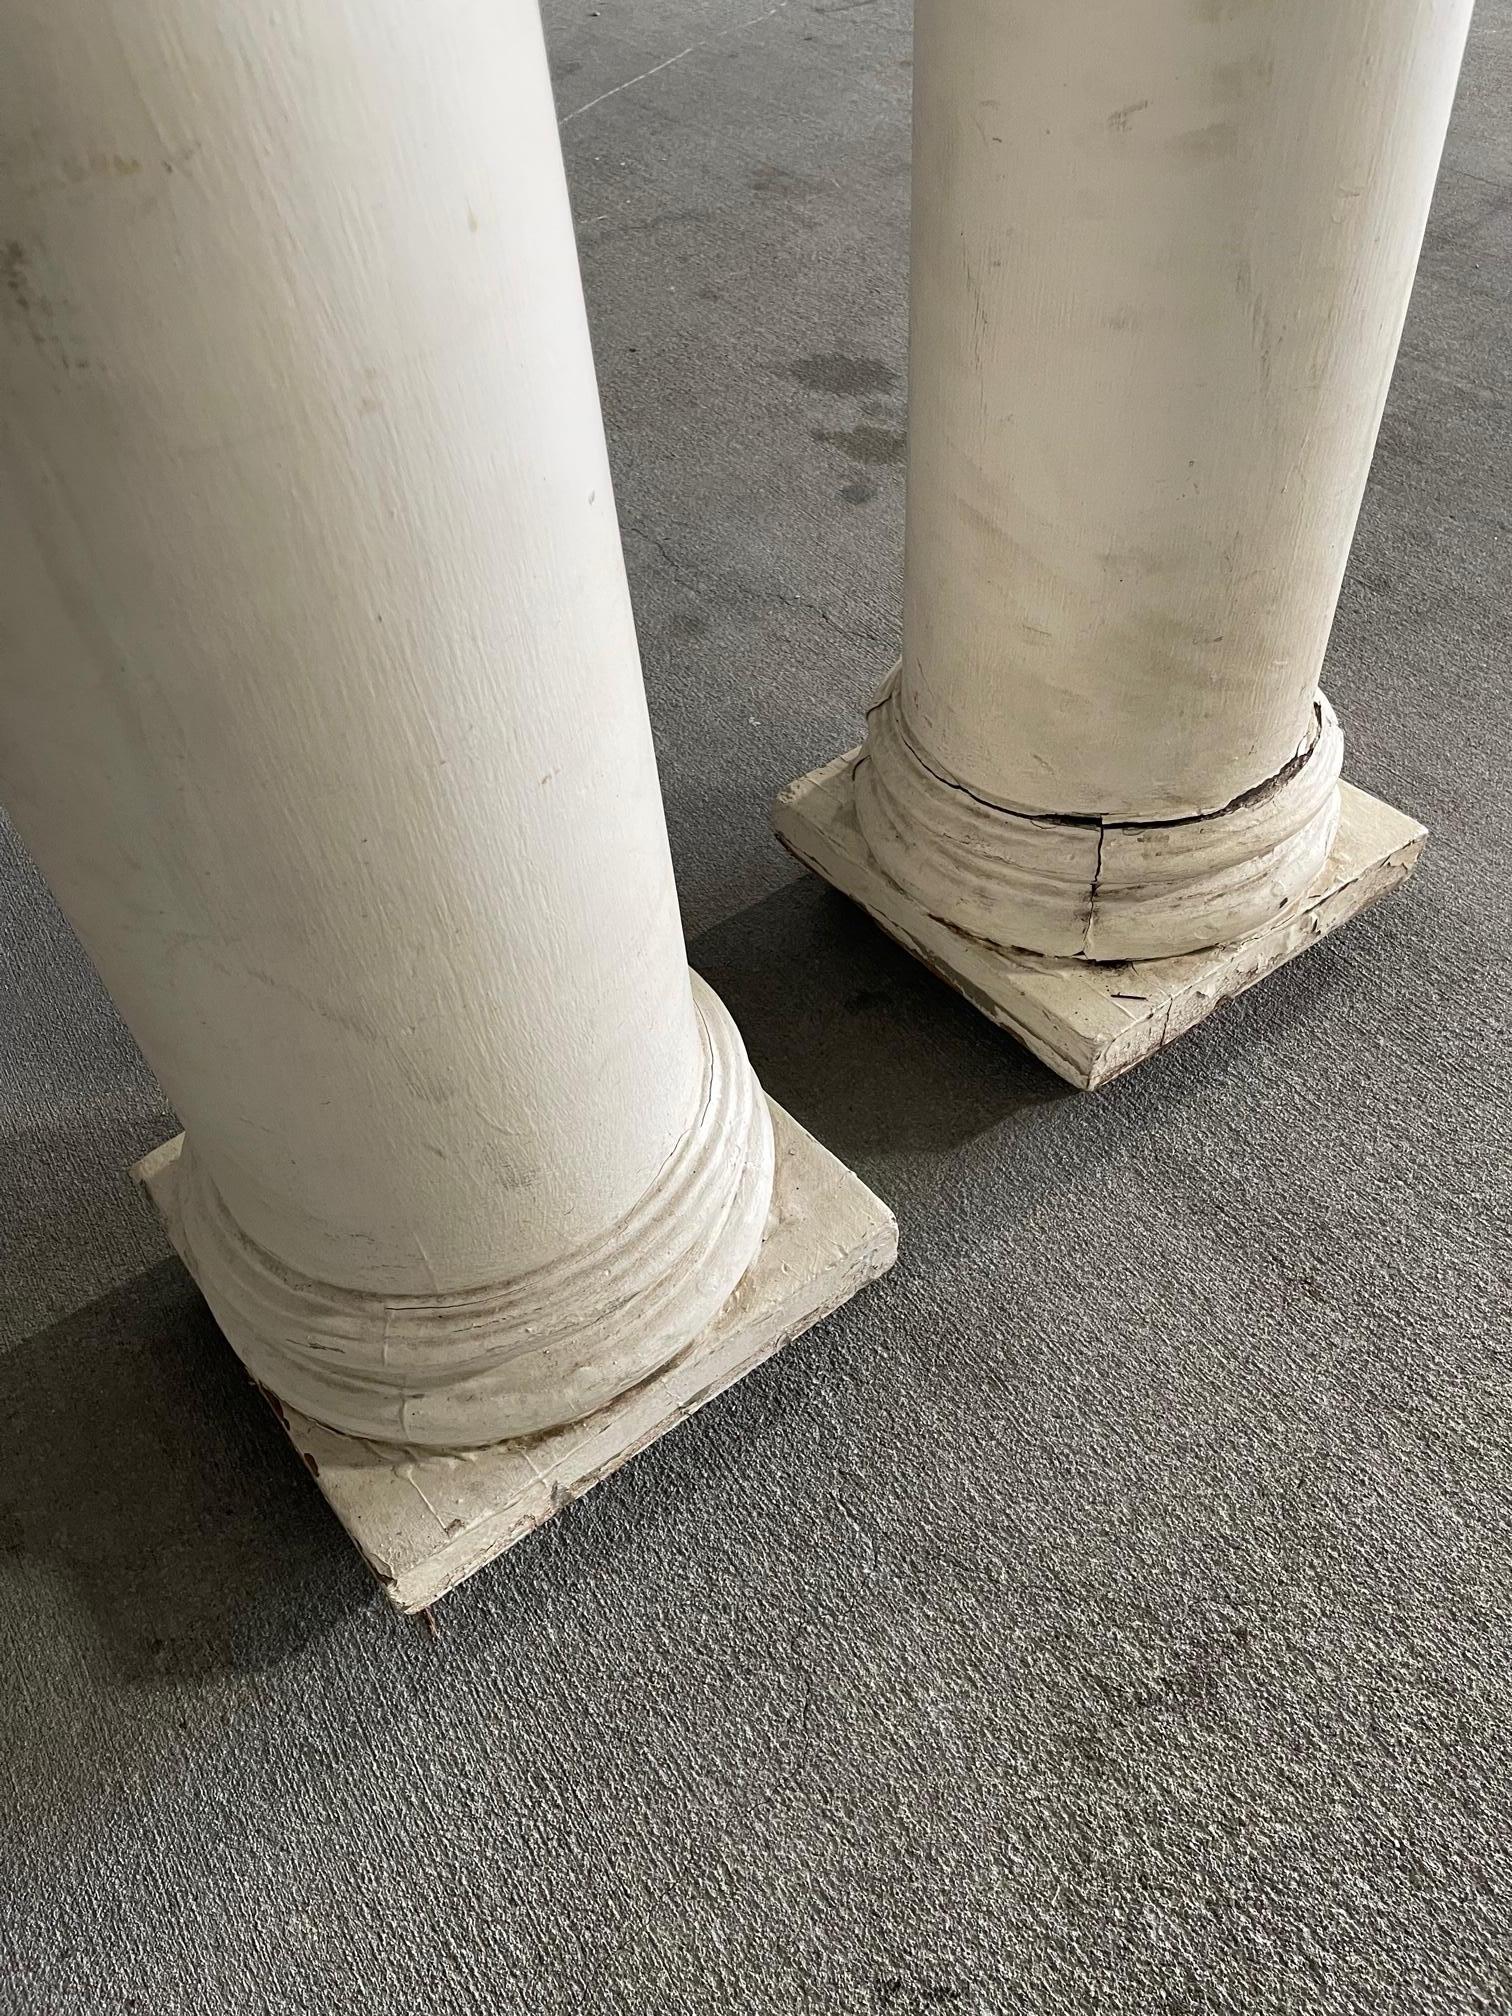 Pair of Painted Wood Full-Length Columns with Capitals and Bases, 19th Century For Sale 3